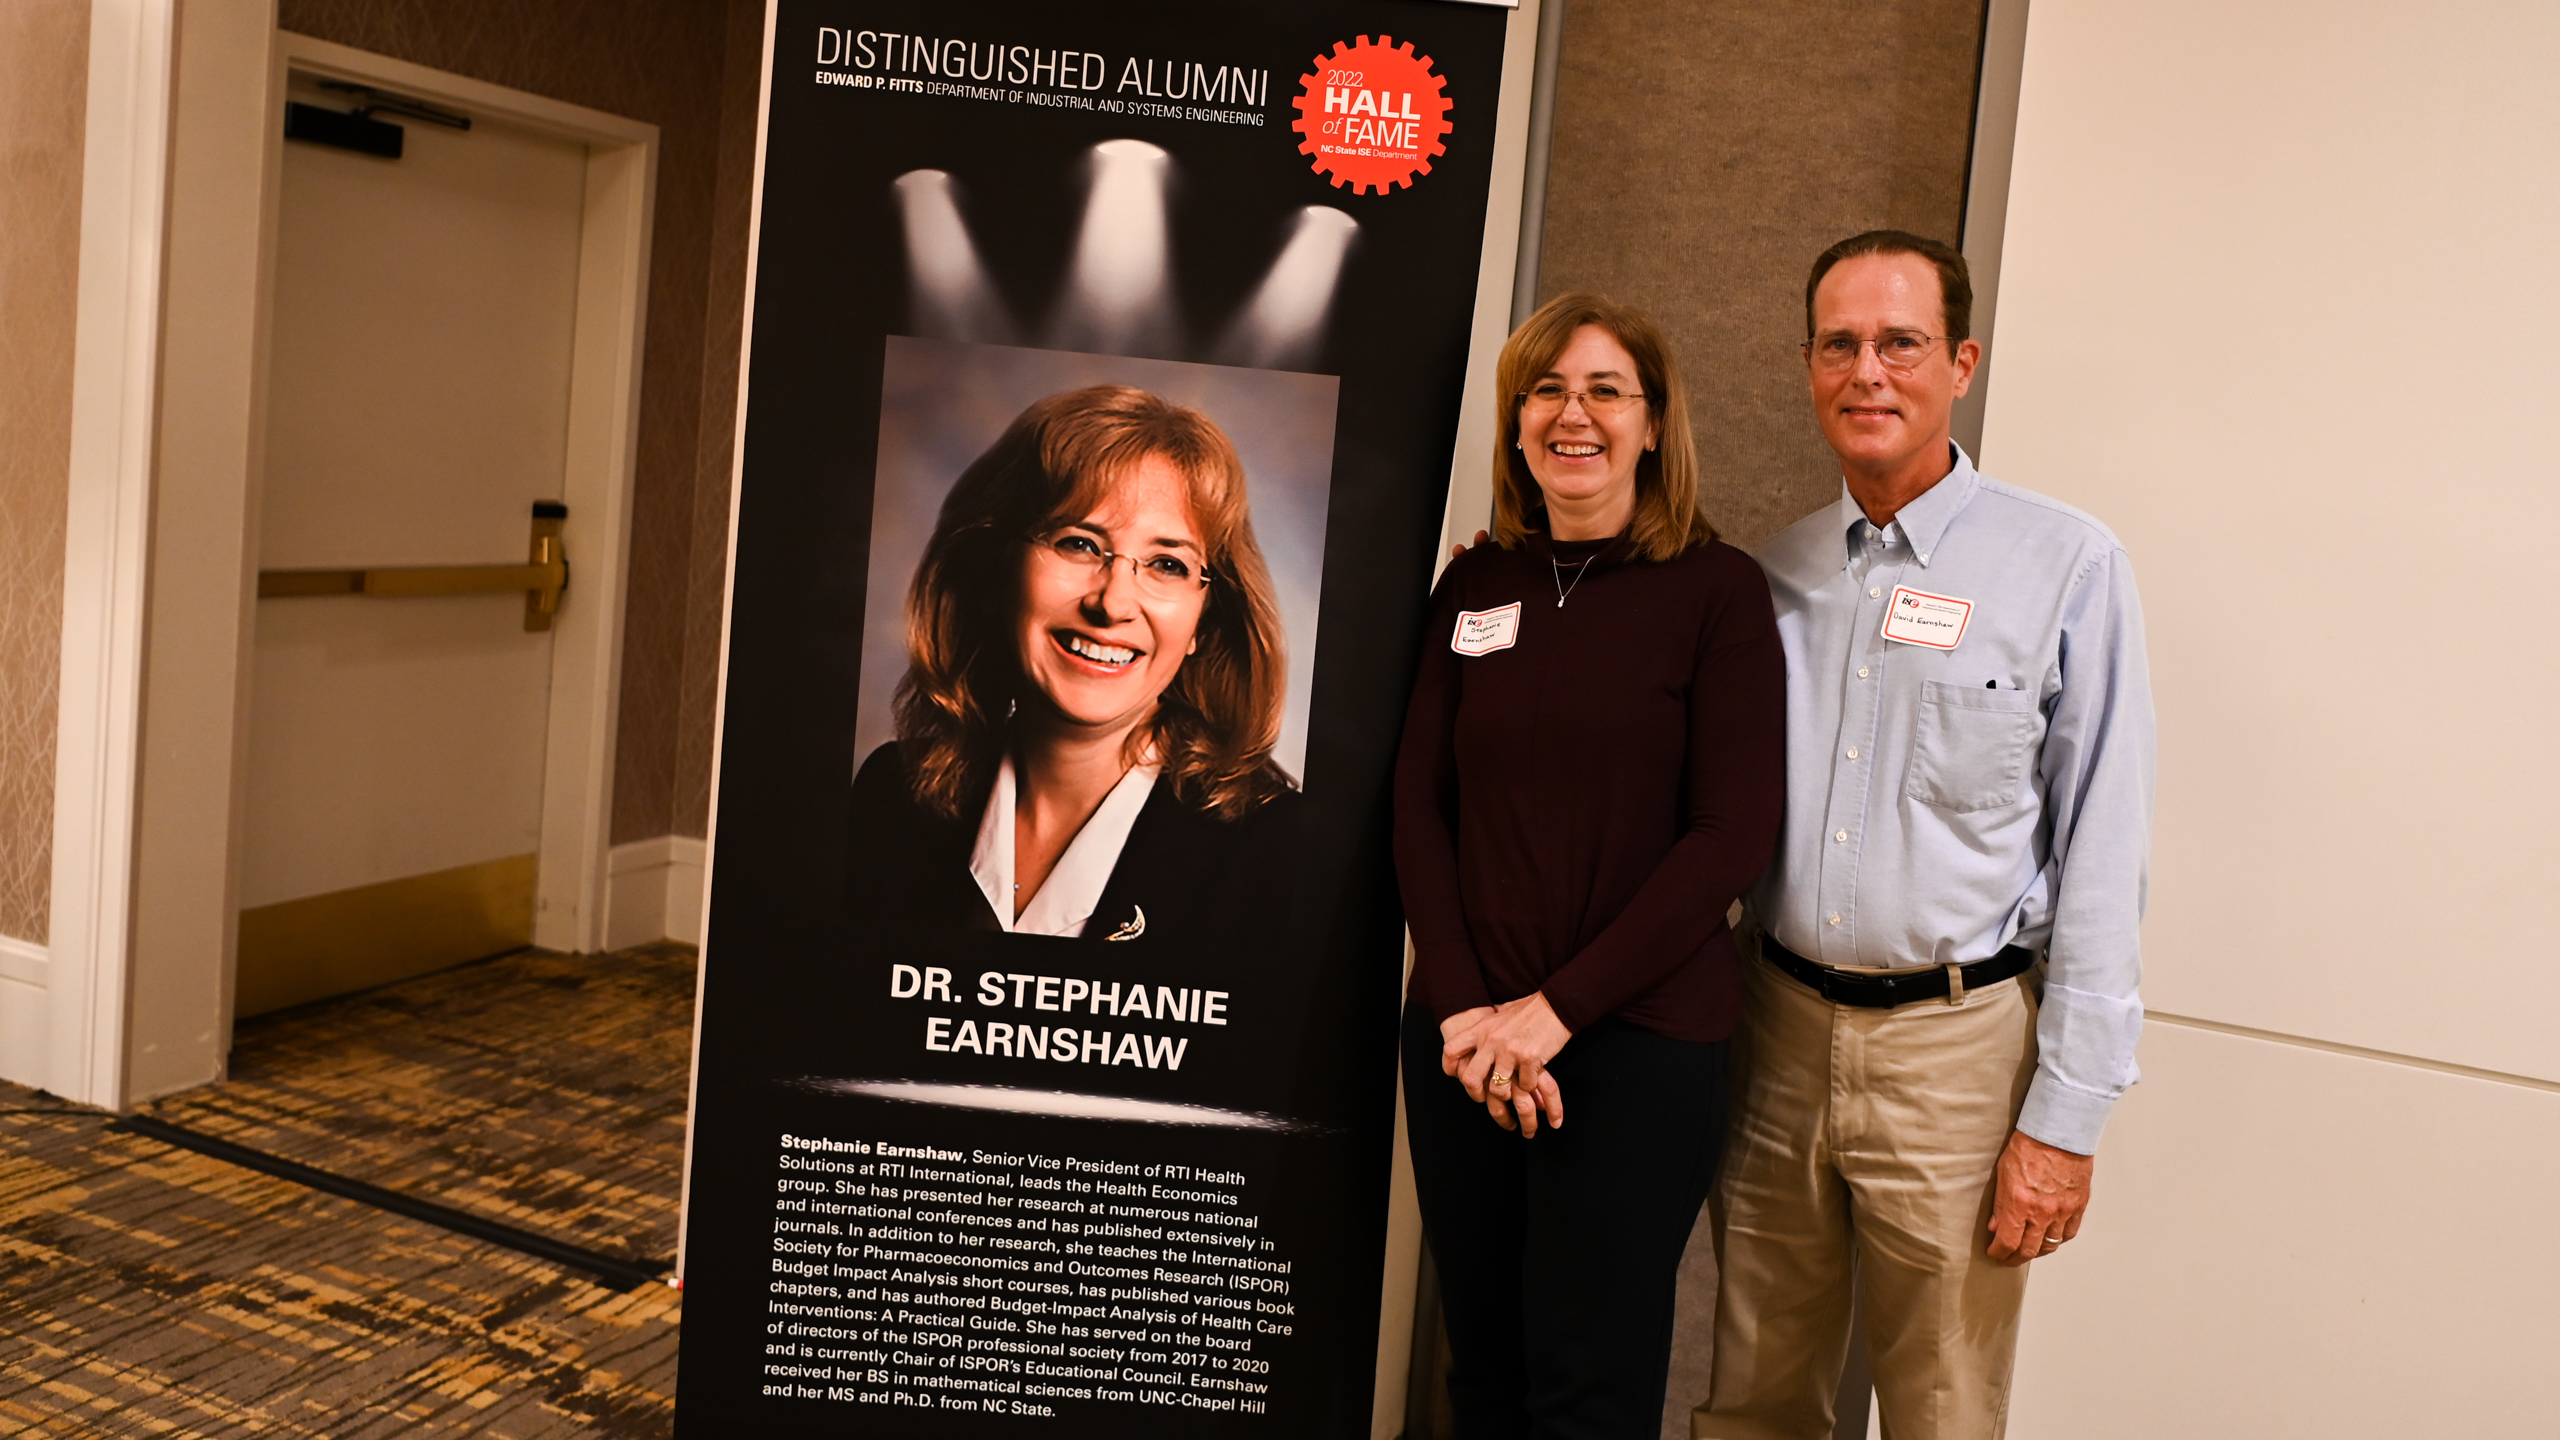 Dr. Stephanie Earnshaw and her husband posing in front of her Distinguished Alumni banner